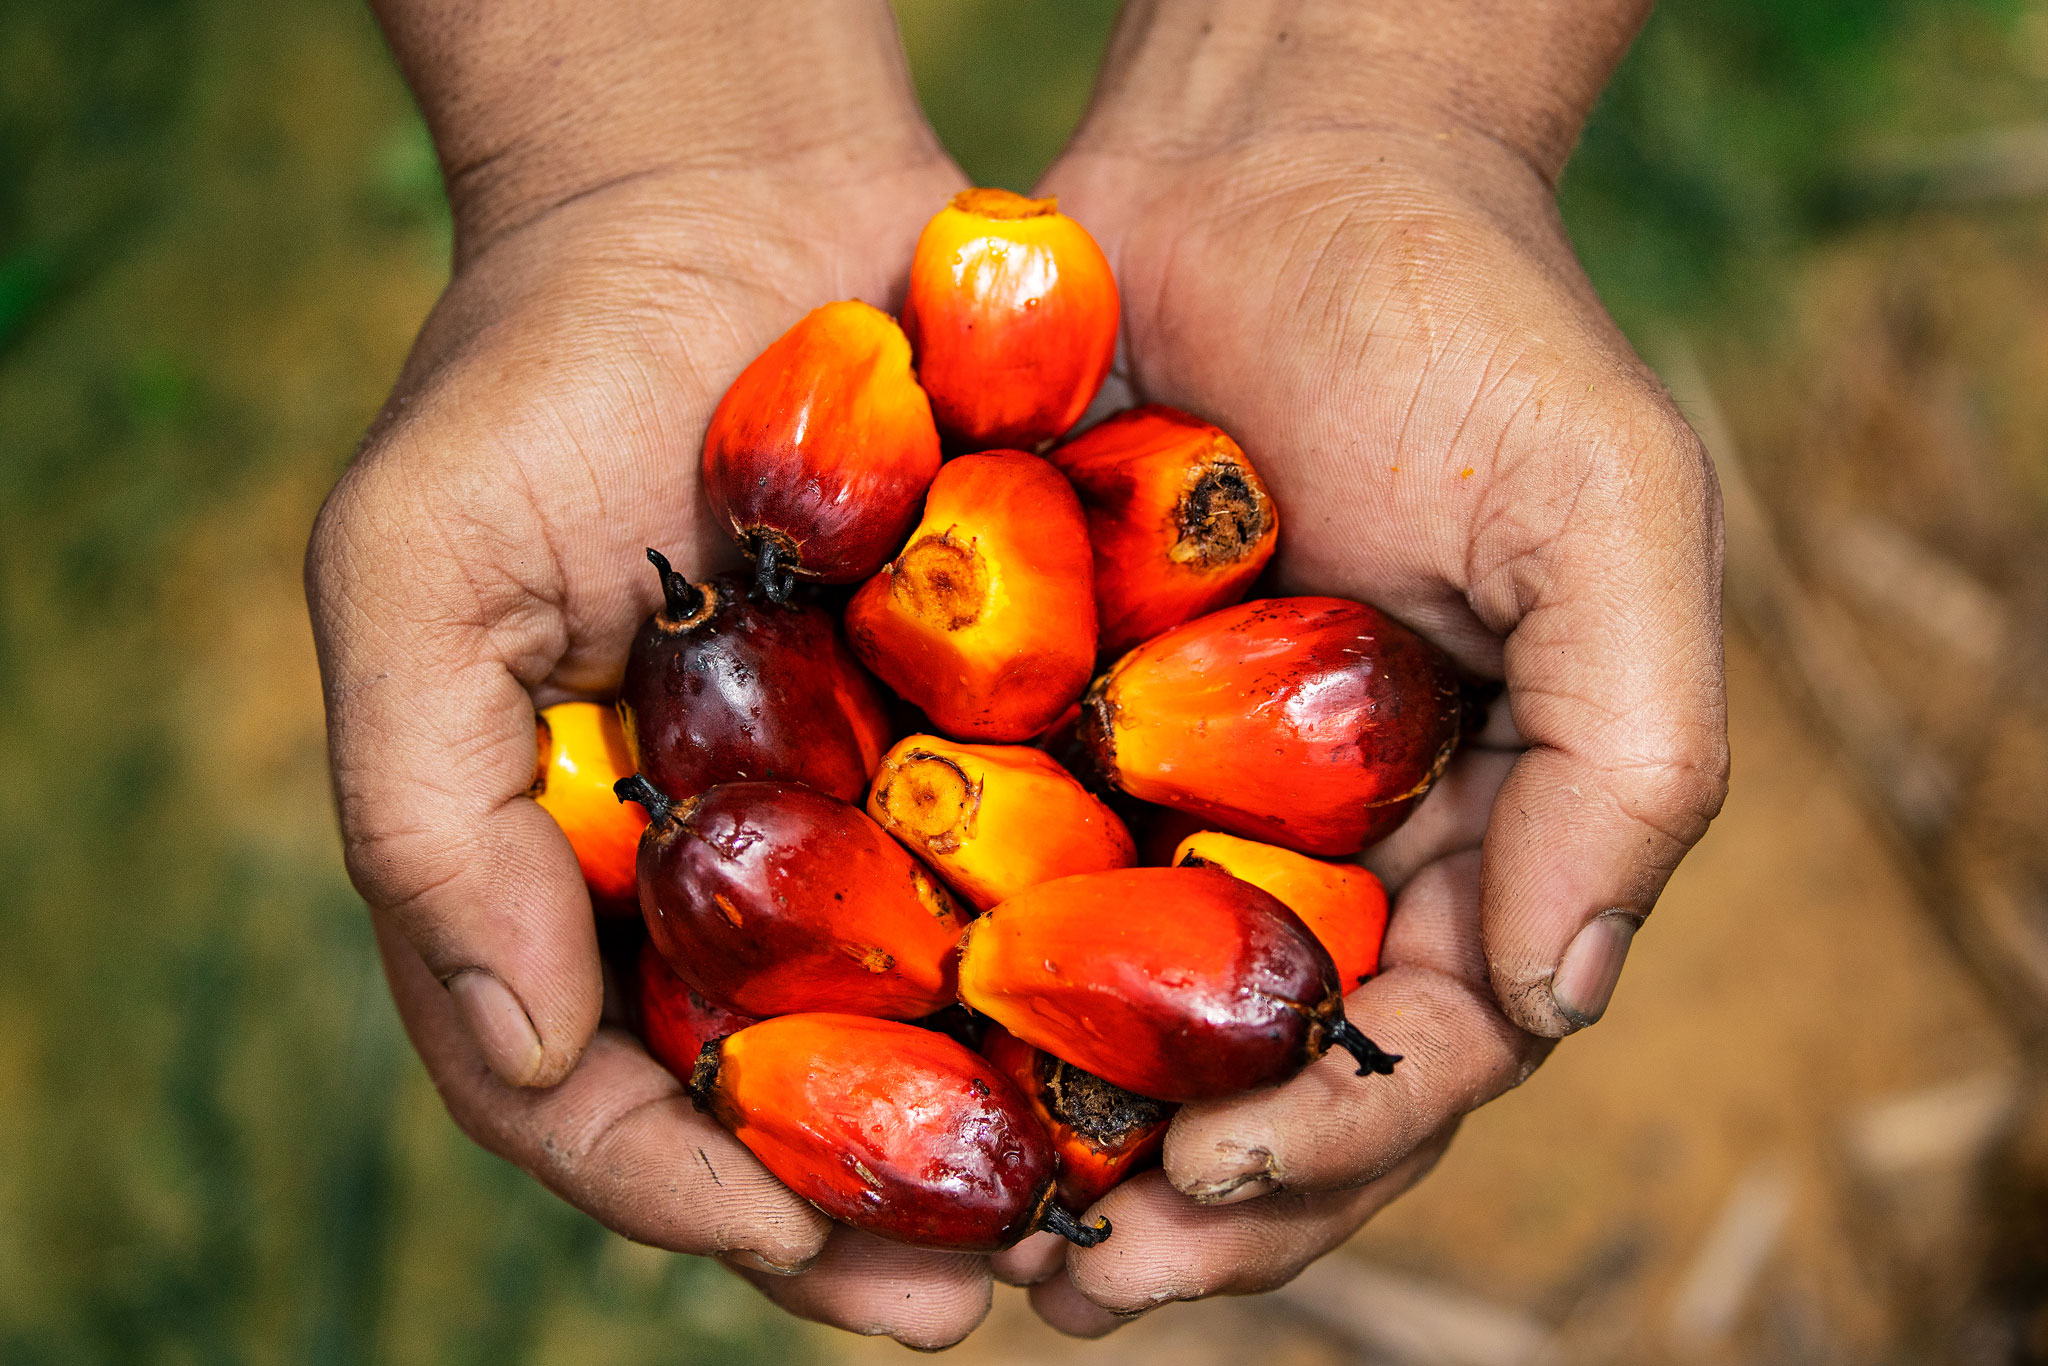 Going Green - Palm Oil